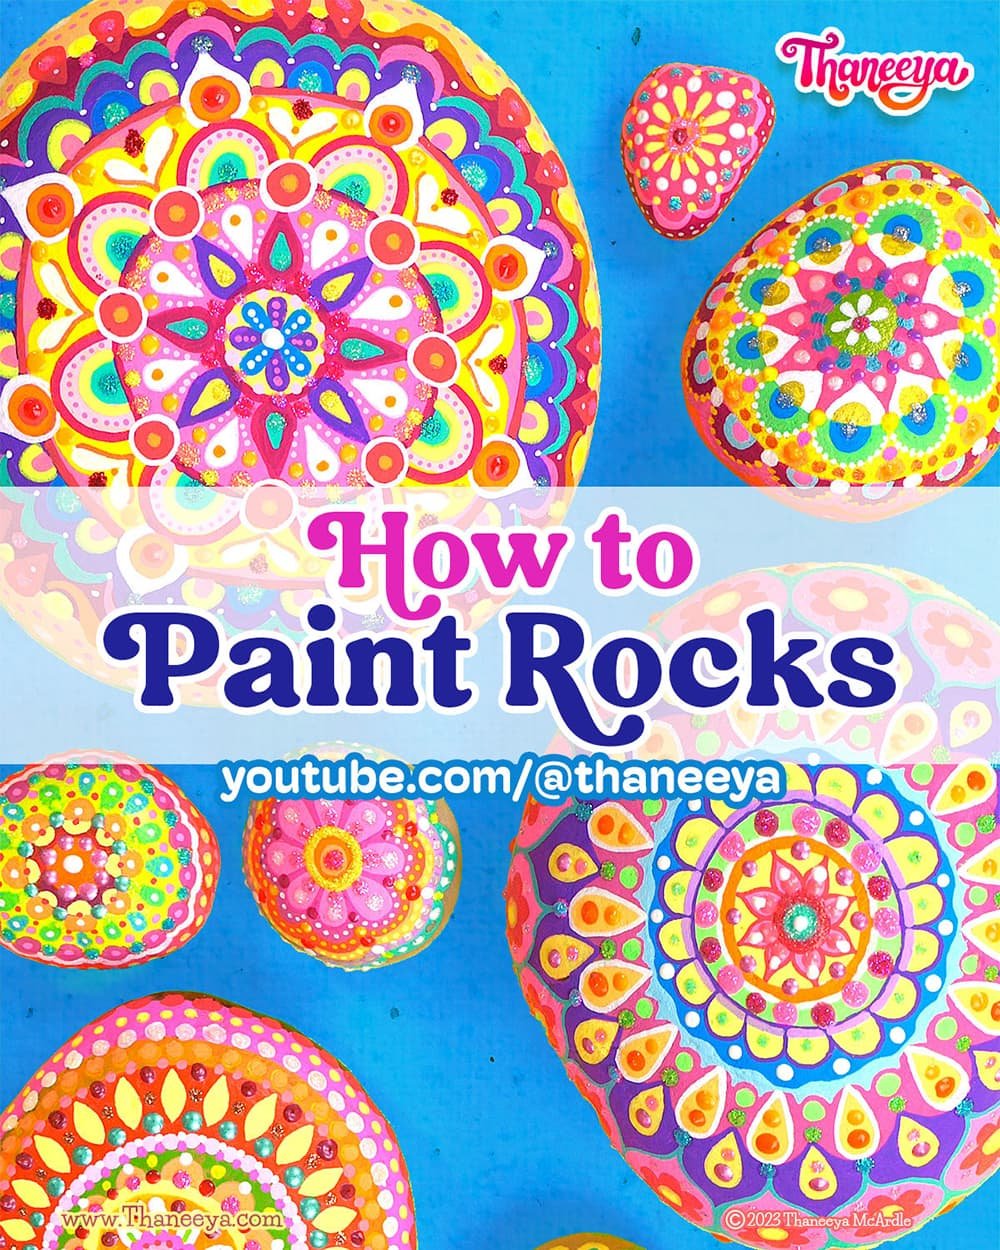 6 Easy Places to Buy Rocks to Paint